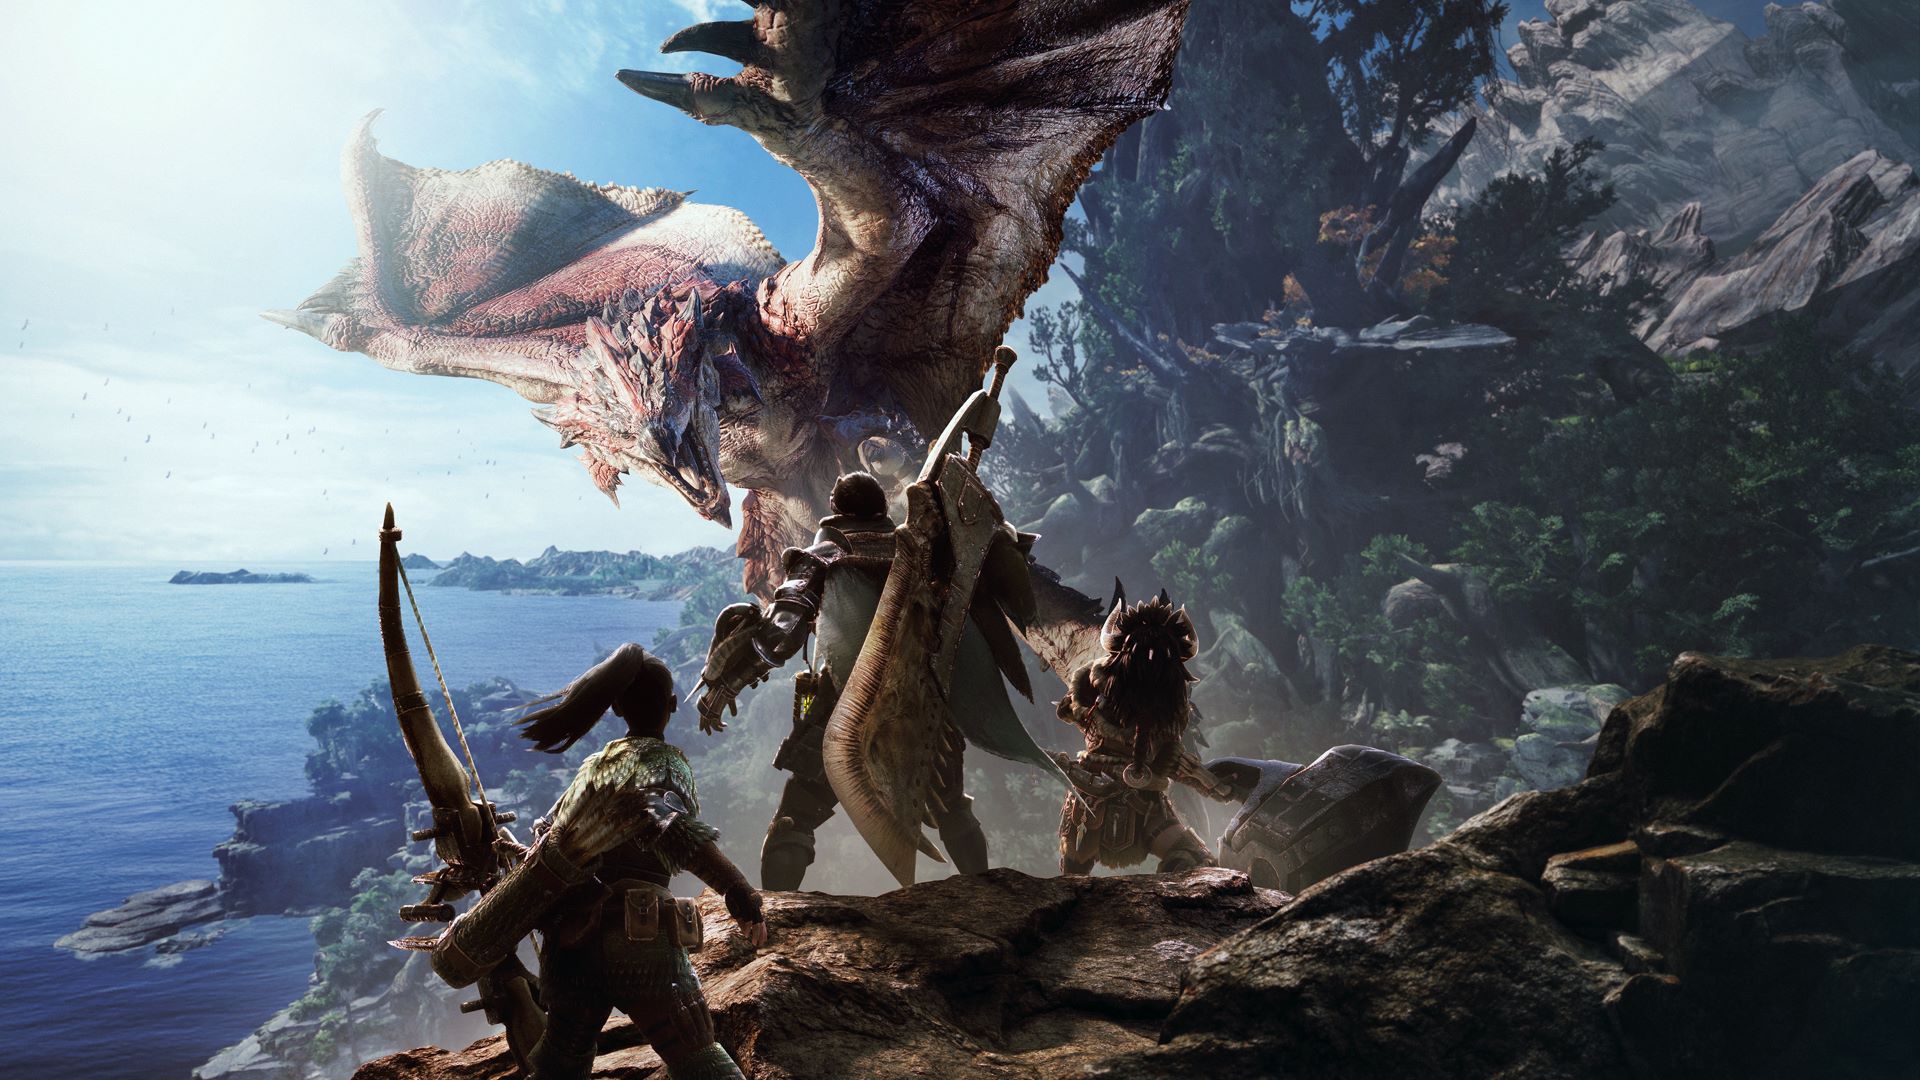 Sony Paid To Delay Monster Hunter World's PC Version And Block Crossplay,  Per New Leak – Rumor